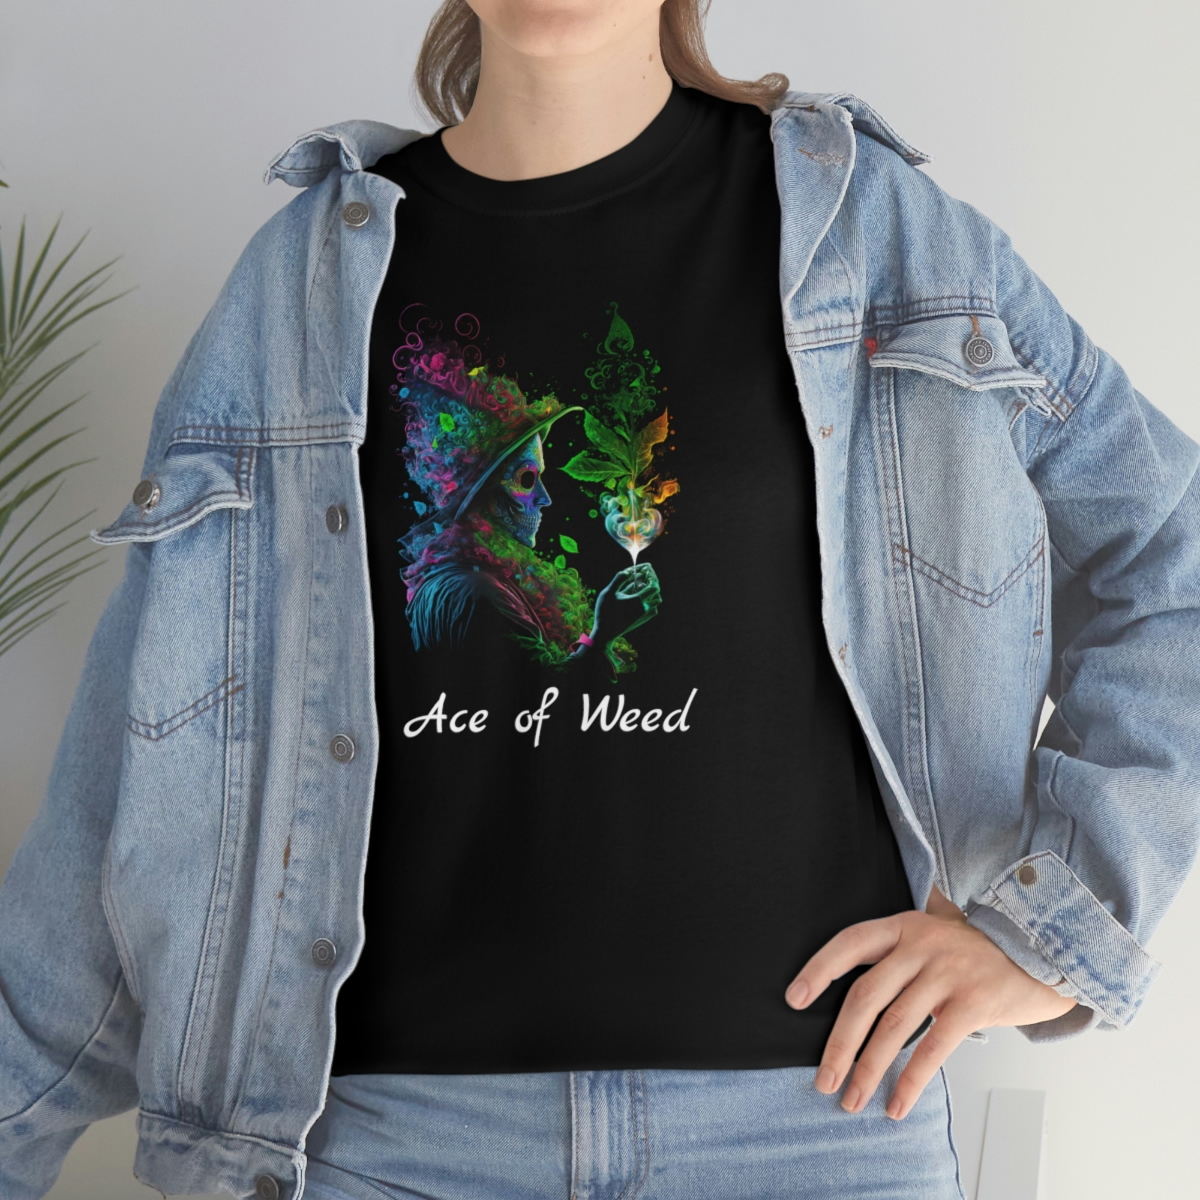 Trippy Shirts Graphic Tees: Ace Of Weed Short Sleeve T shirt